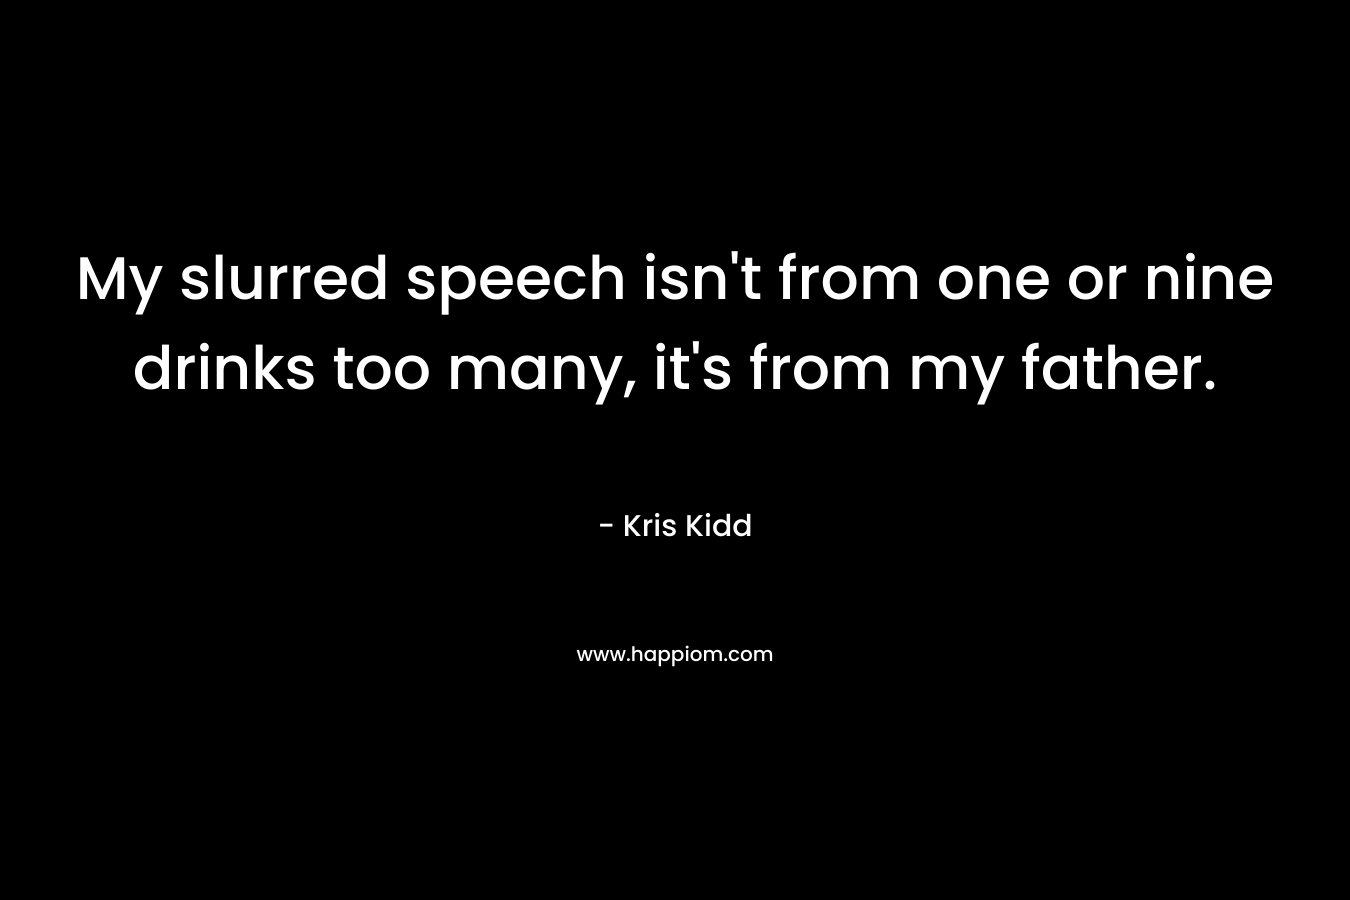 My slurred speech isn’t from one or nine drinks too many, it’s from my father. – Kris Kidd